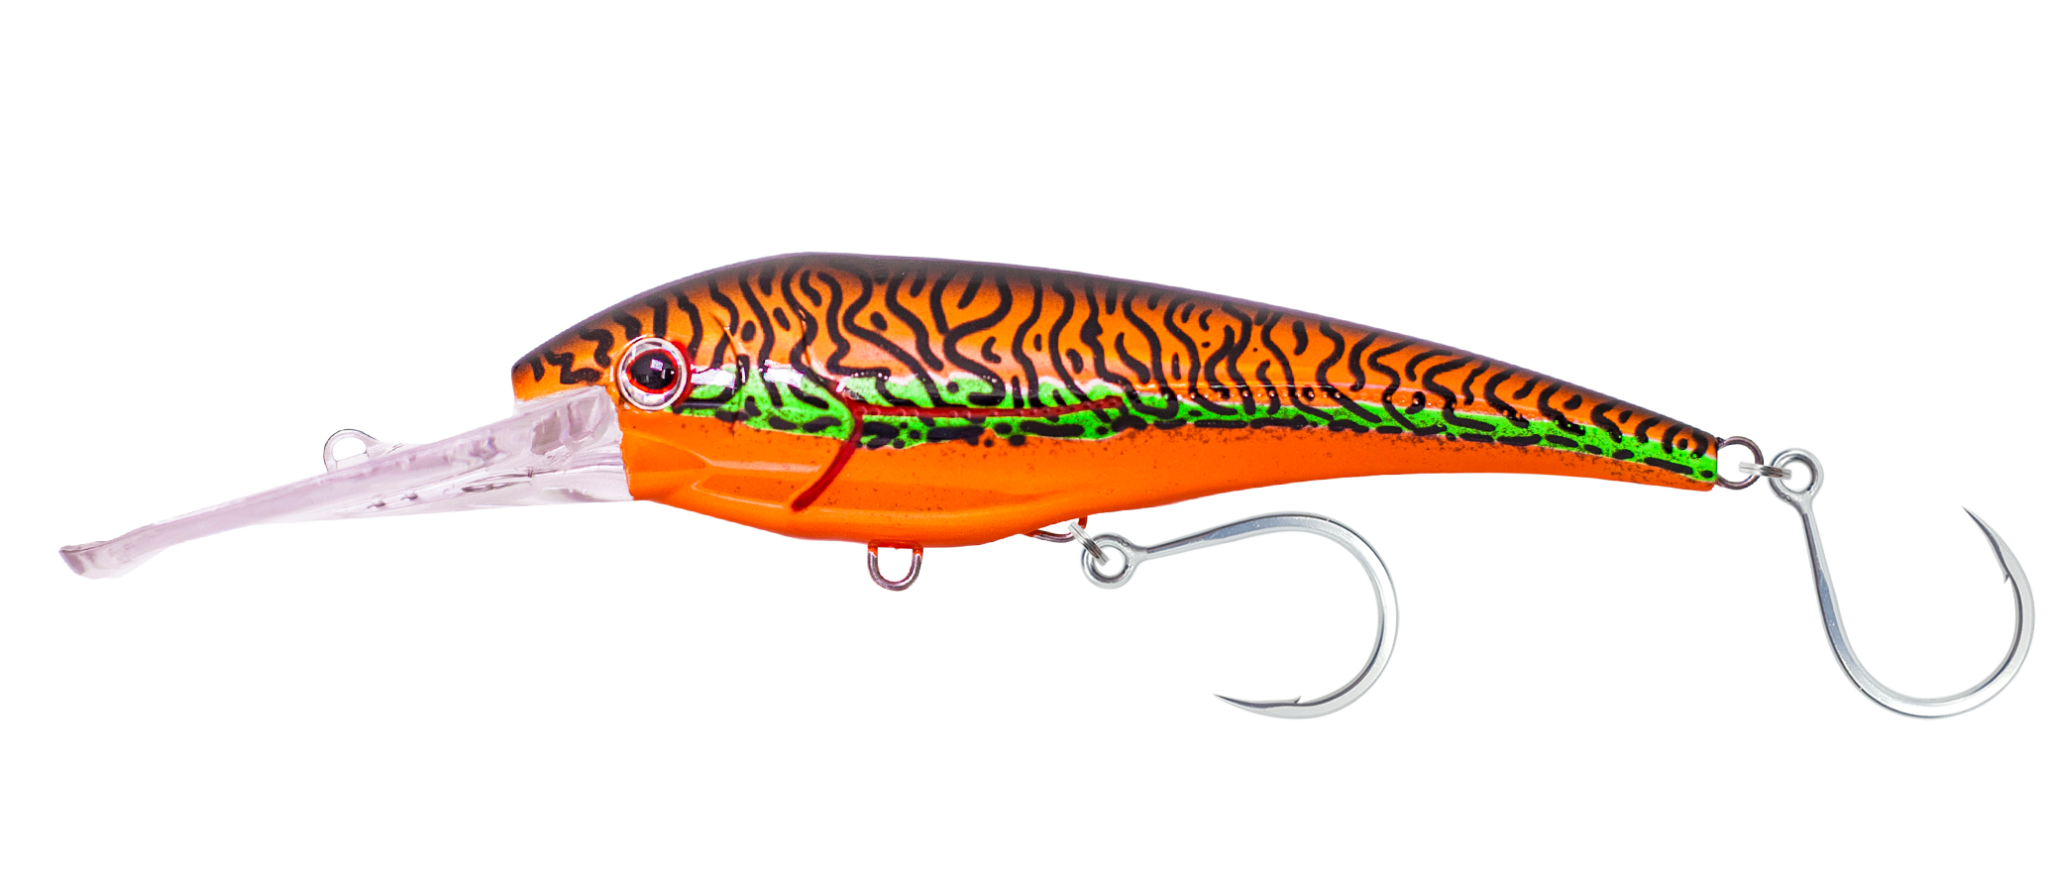 Nomad - DTX Minnow Sinking 200 - 8 Lure - Florida Watersports